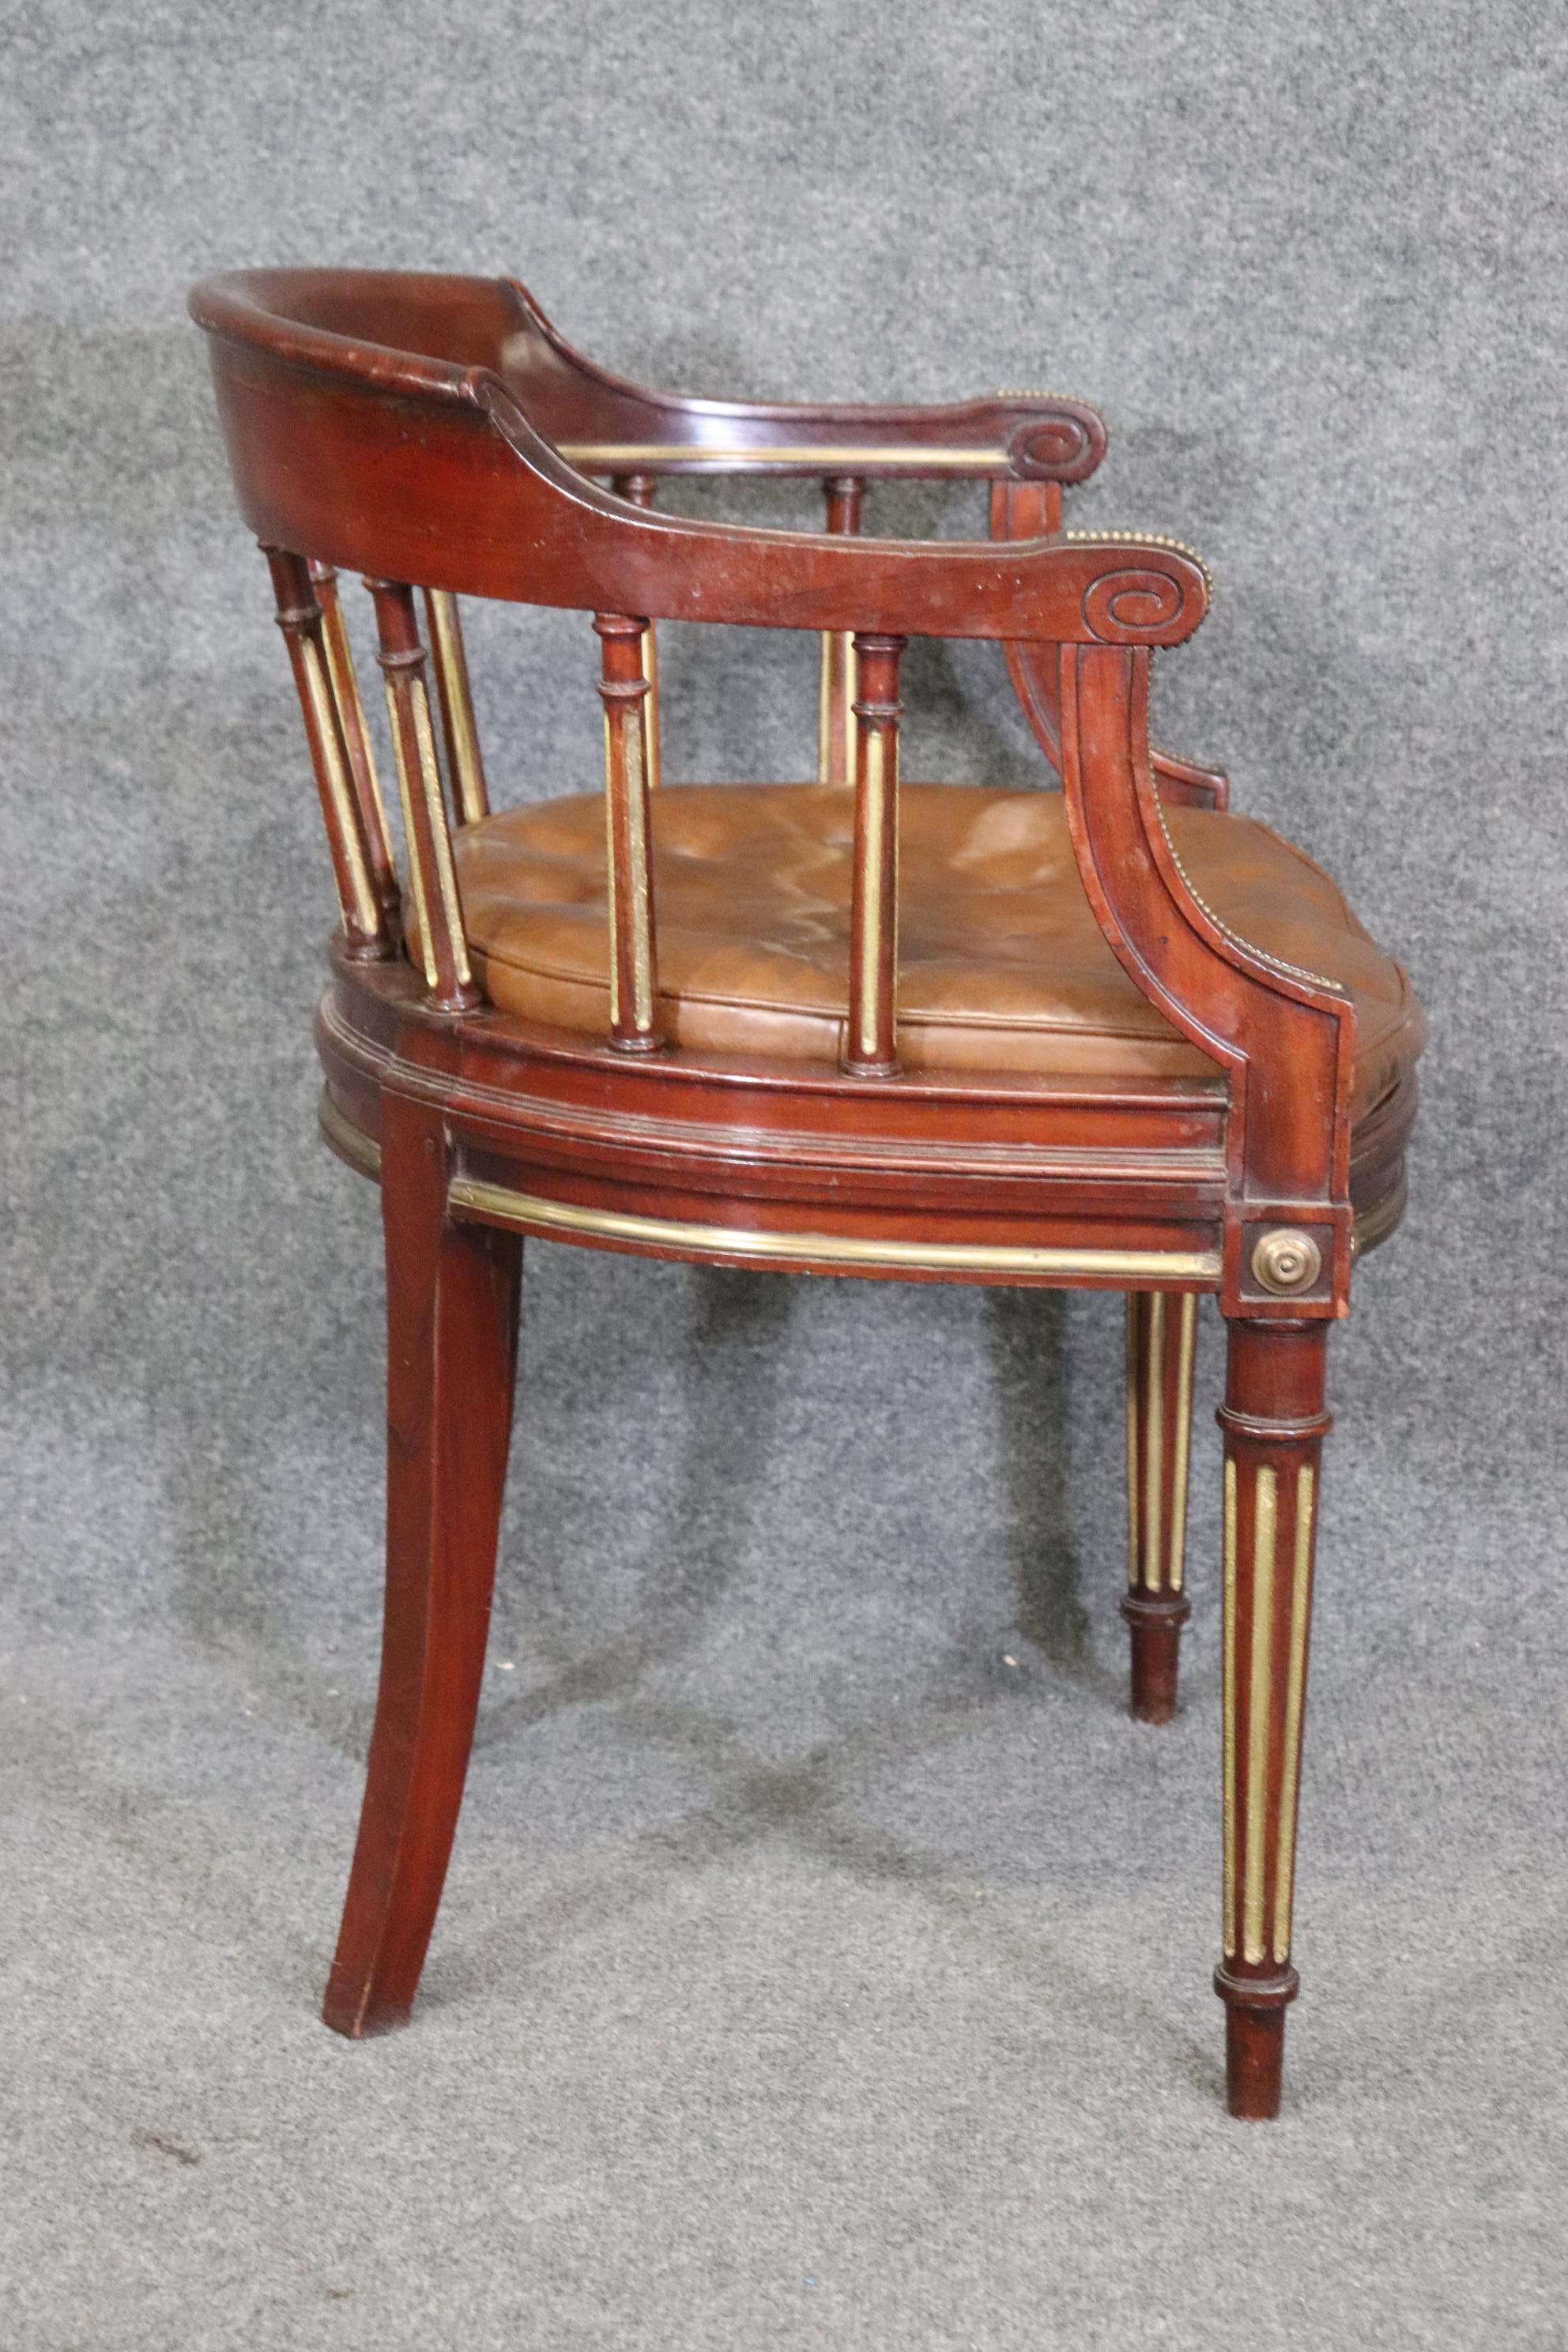 Caning Antique French Louis XVI Style Mahogany Armchair With Brass Mounts For Sale